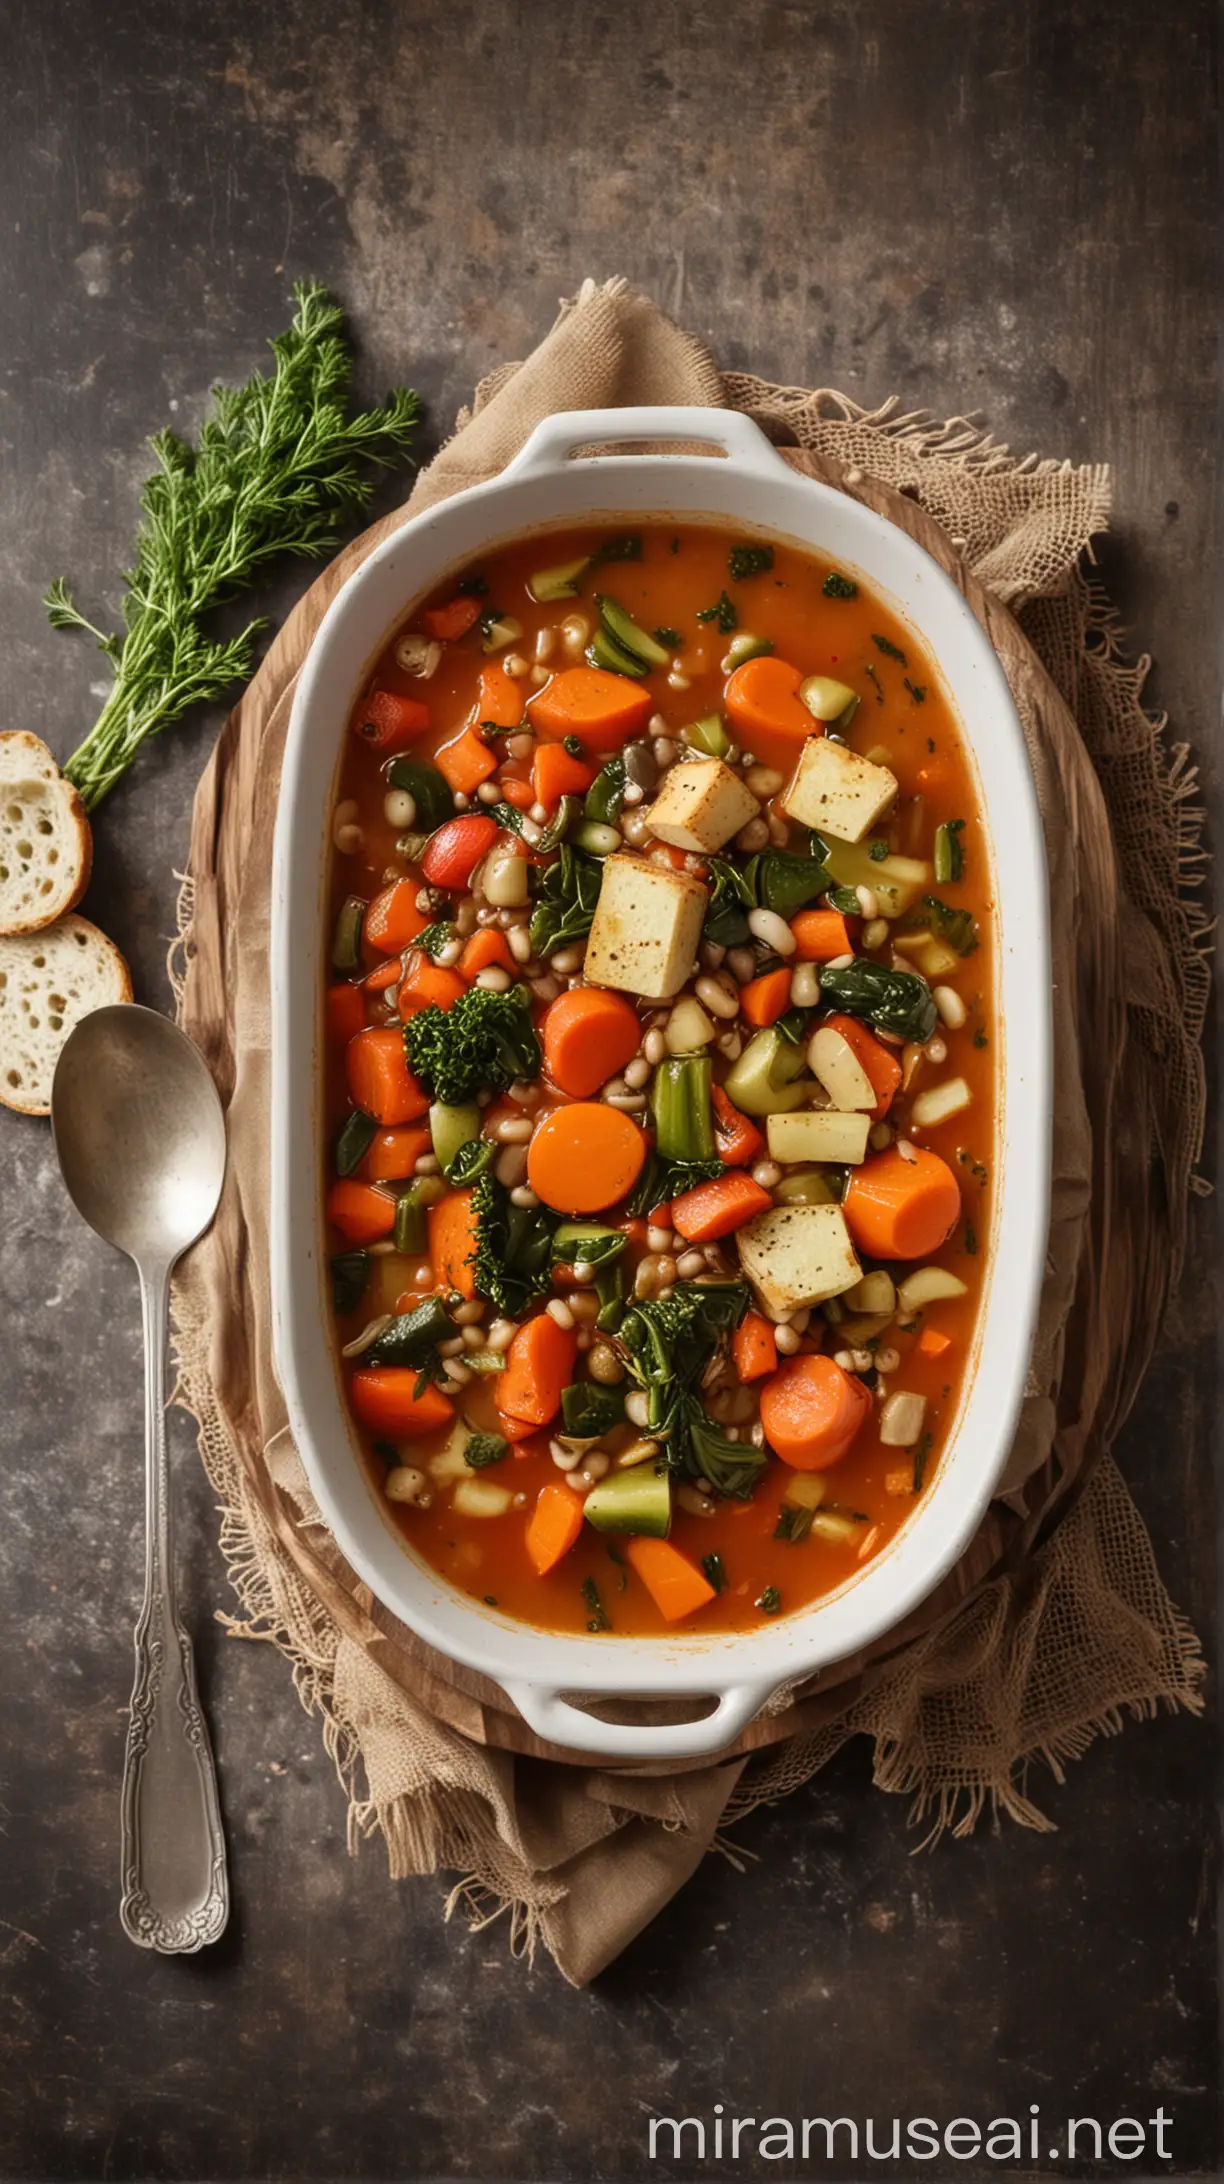 Delicious Vegetable Soup with Fresh Ingredients